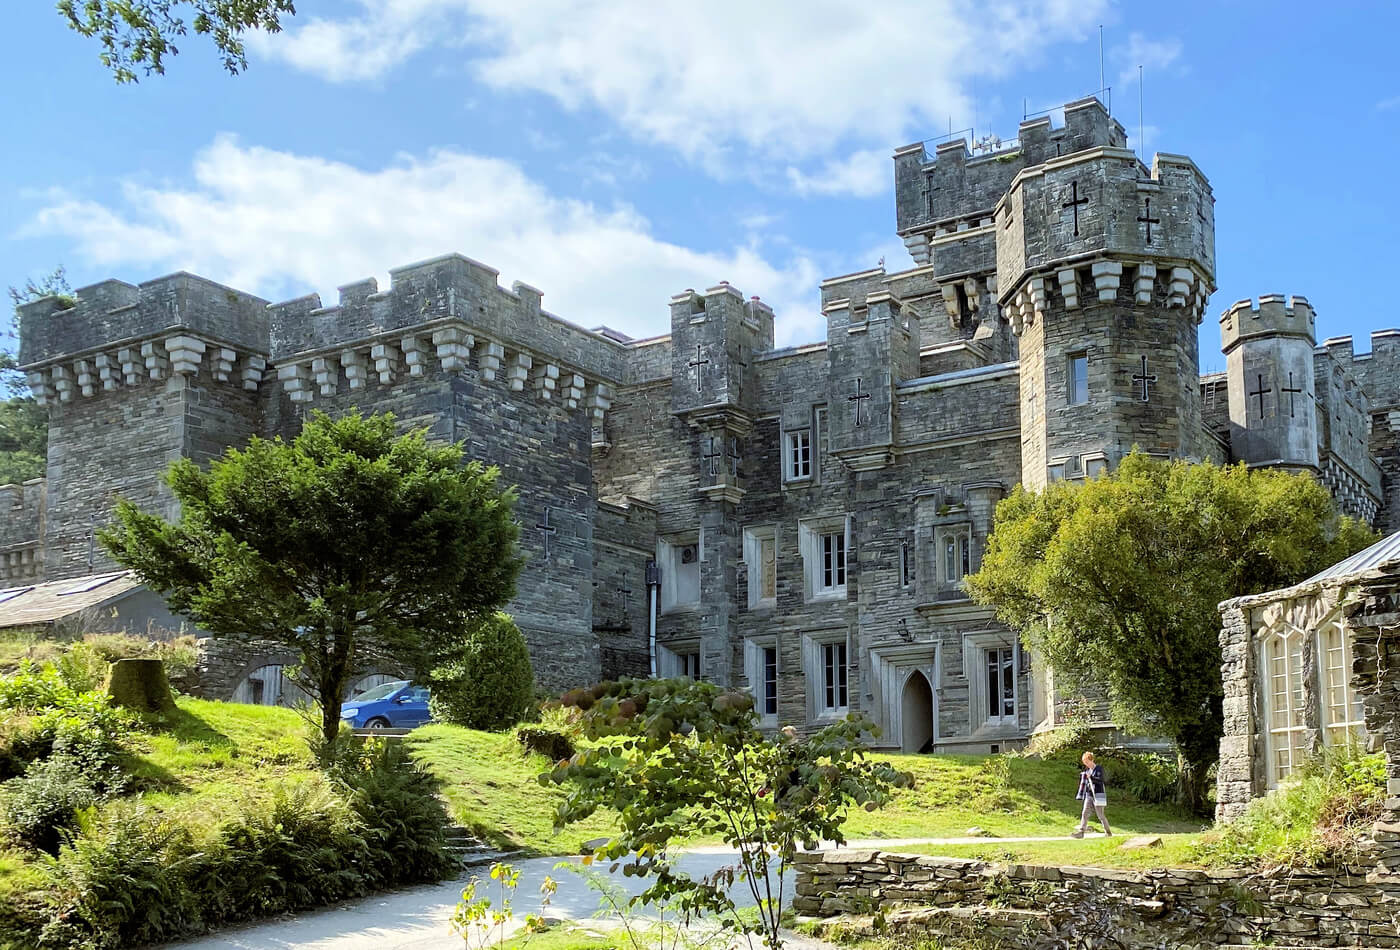 Wray Castle in the Lake District